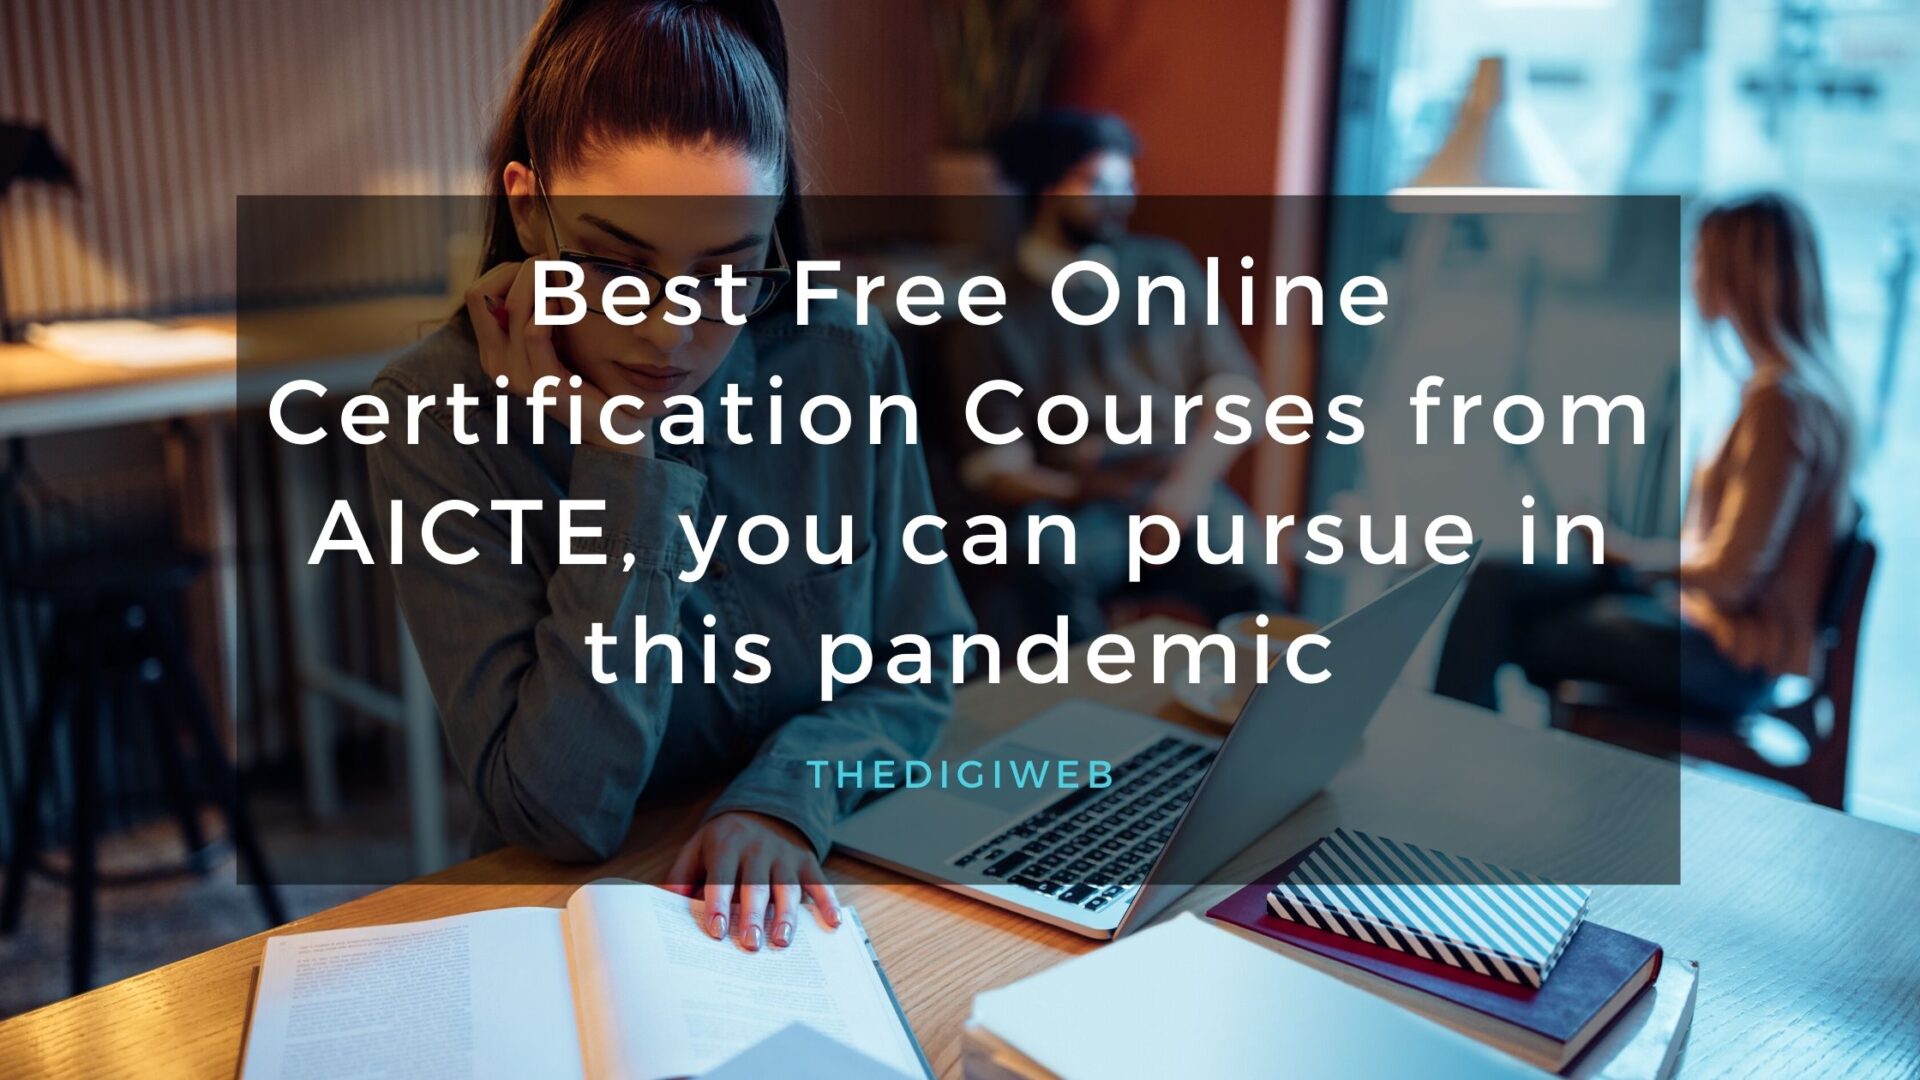 Best Free Online Certification Courses from AICTE, you can pursue in this pandemic